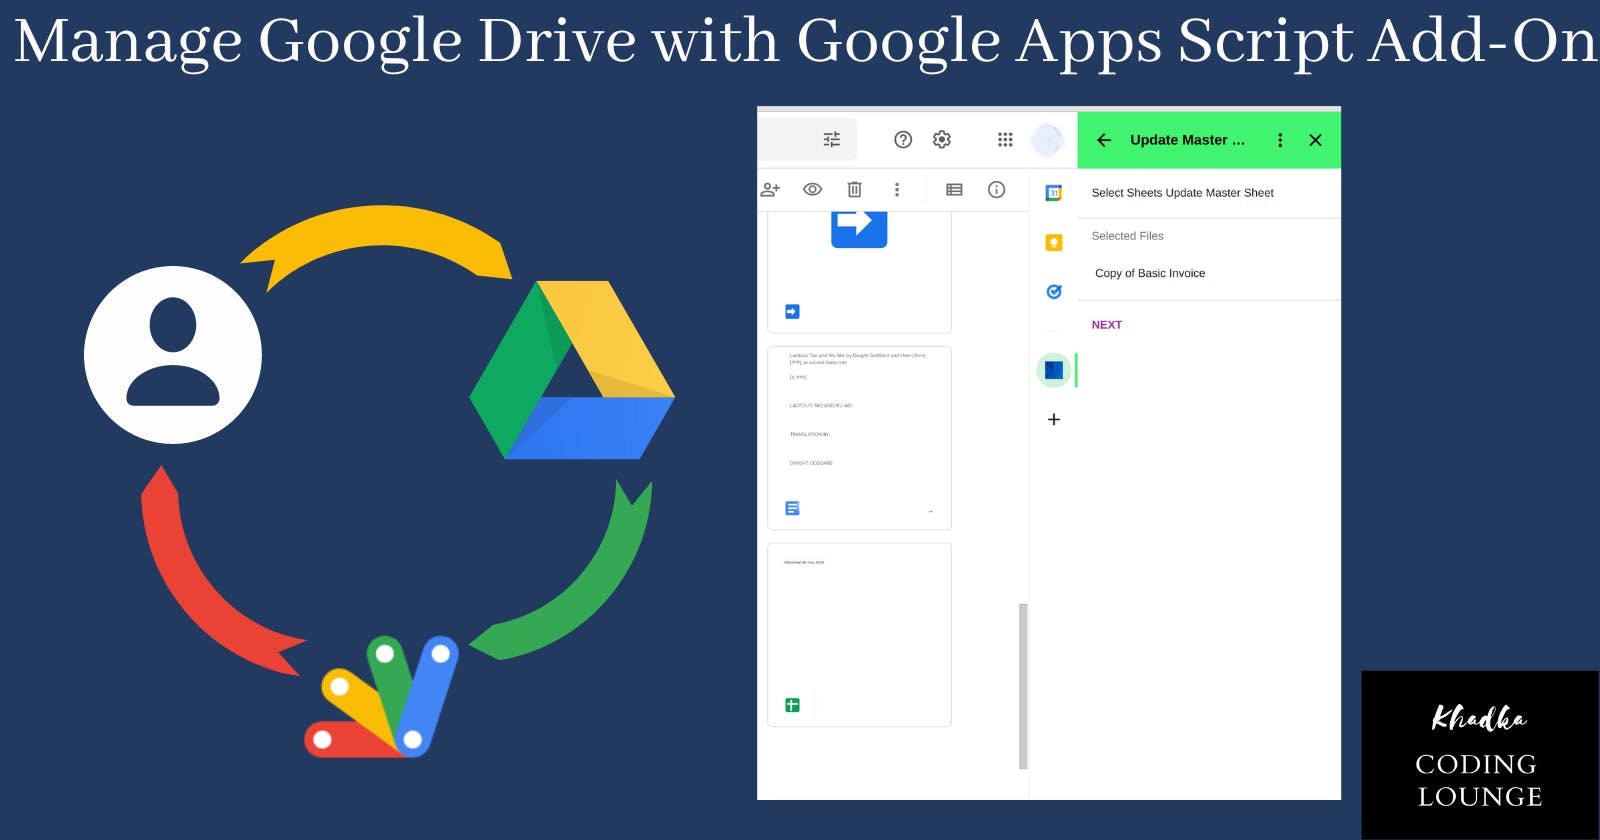 Managing Google Drive with Google Apps Script